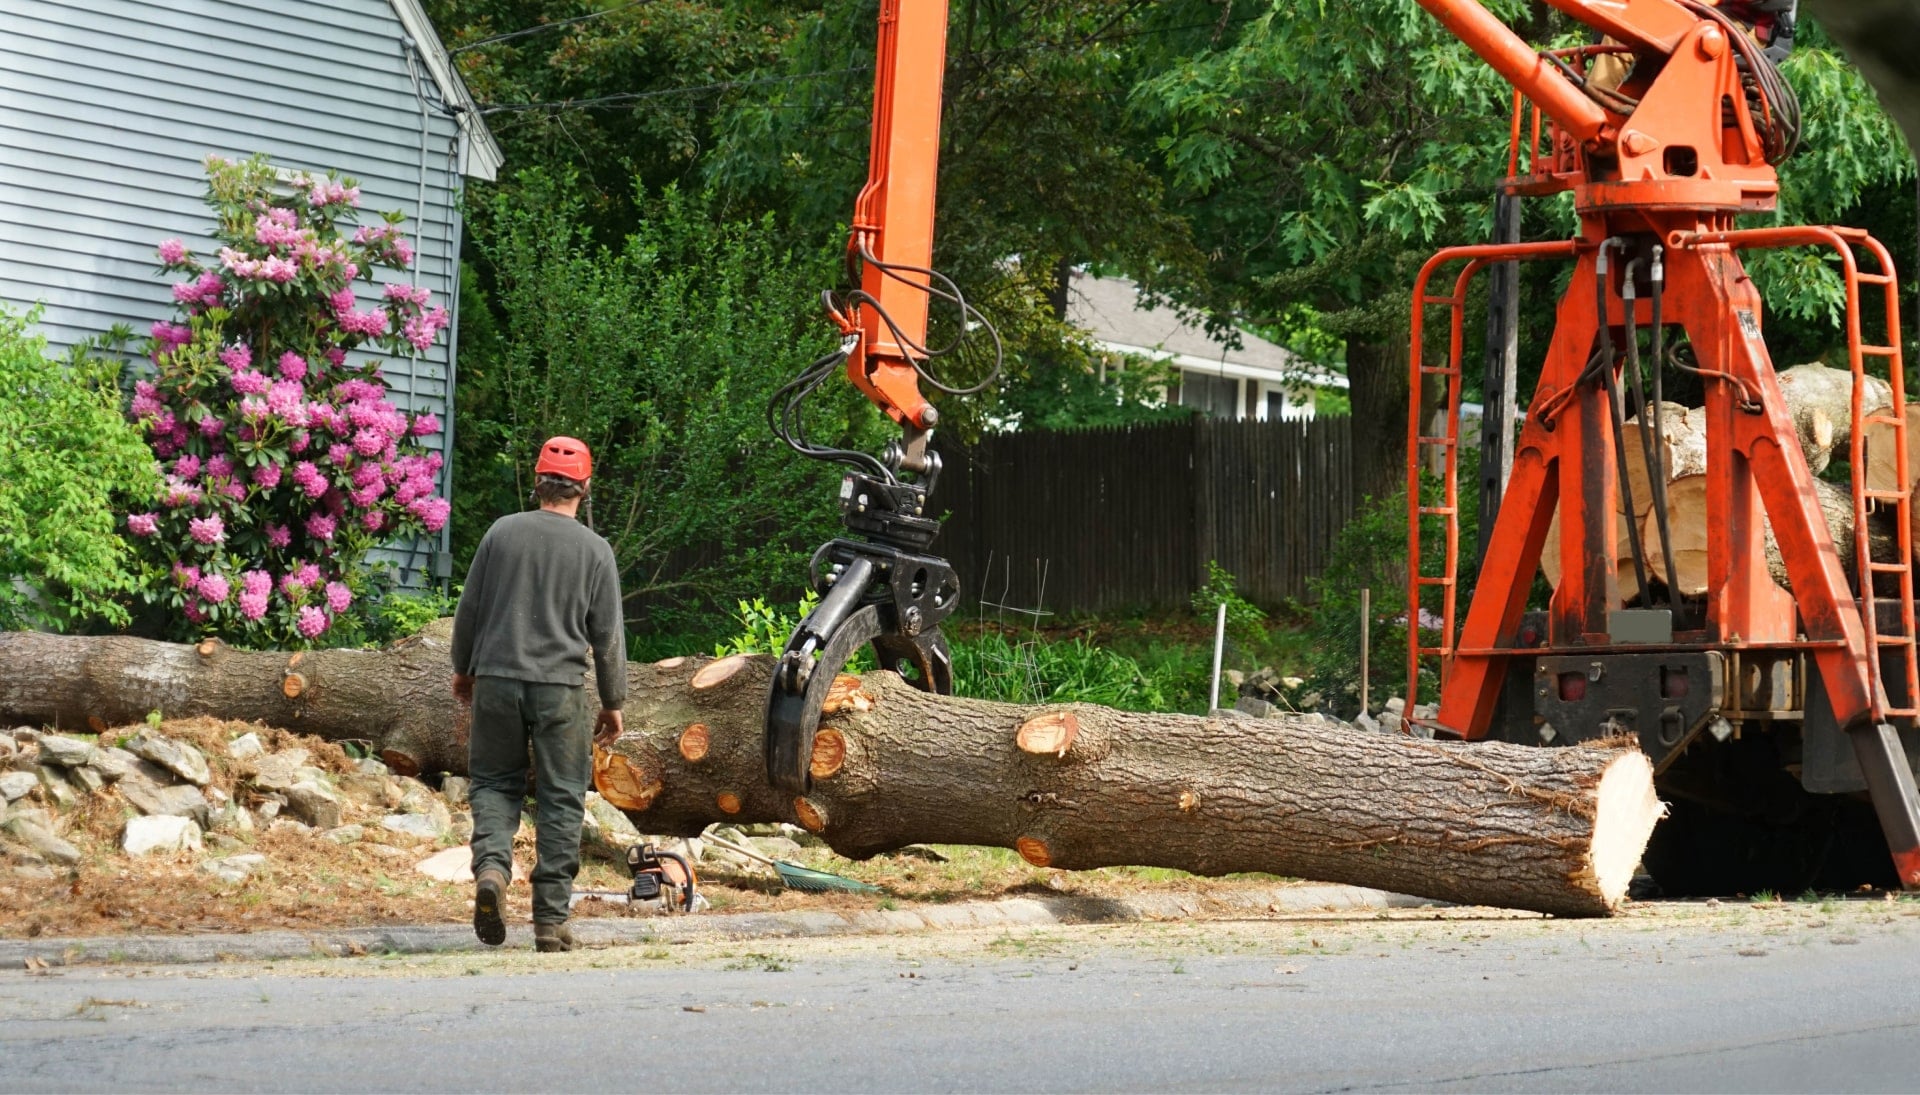 A tree stump has fallen and needs tree removal services in Albuquerque, NM.